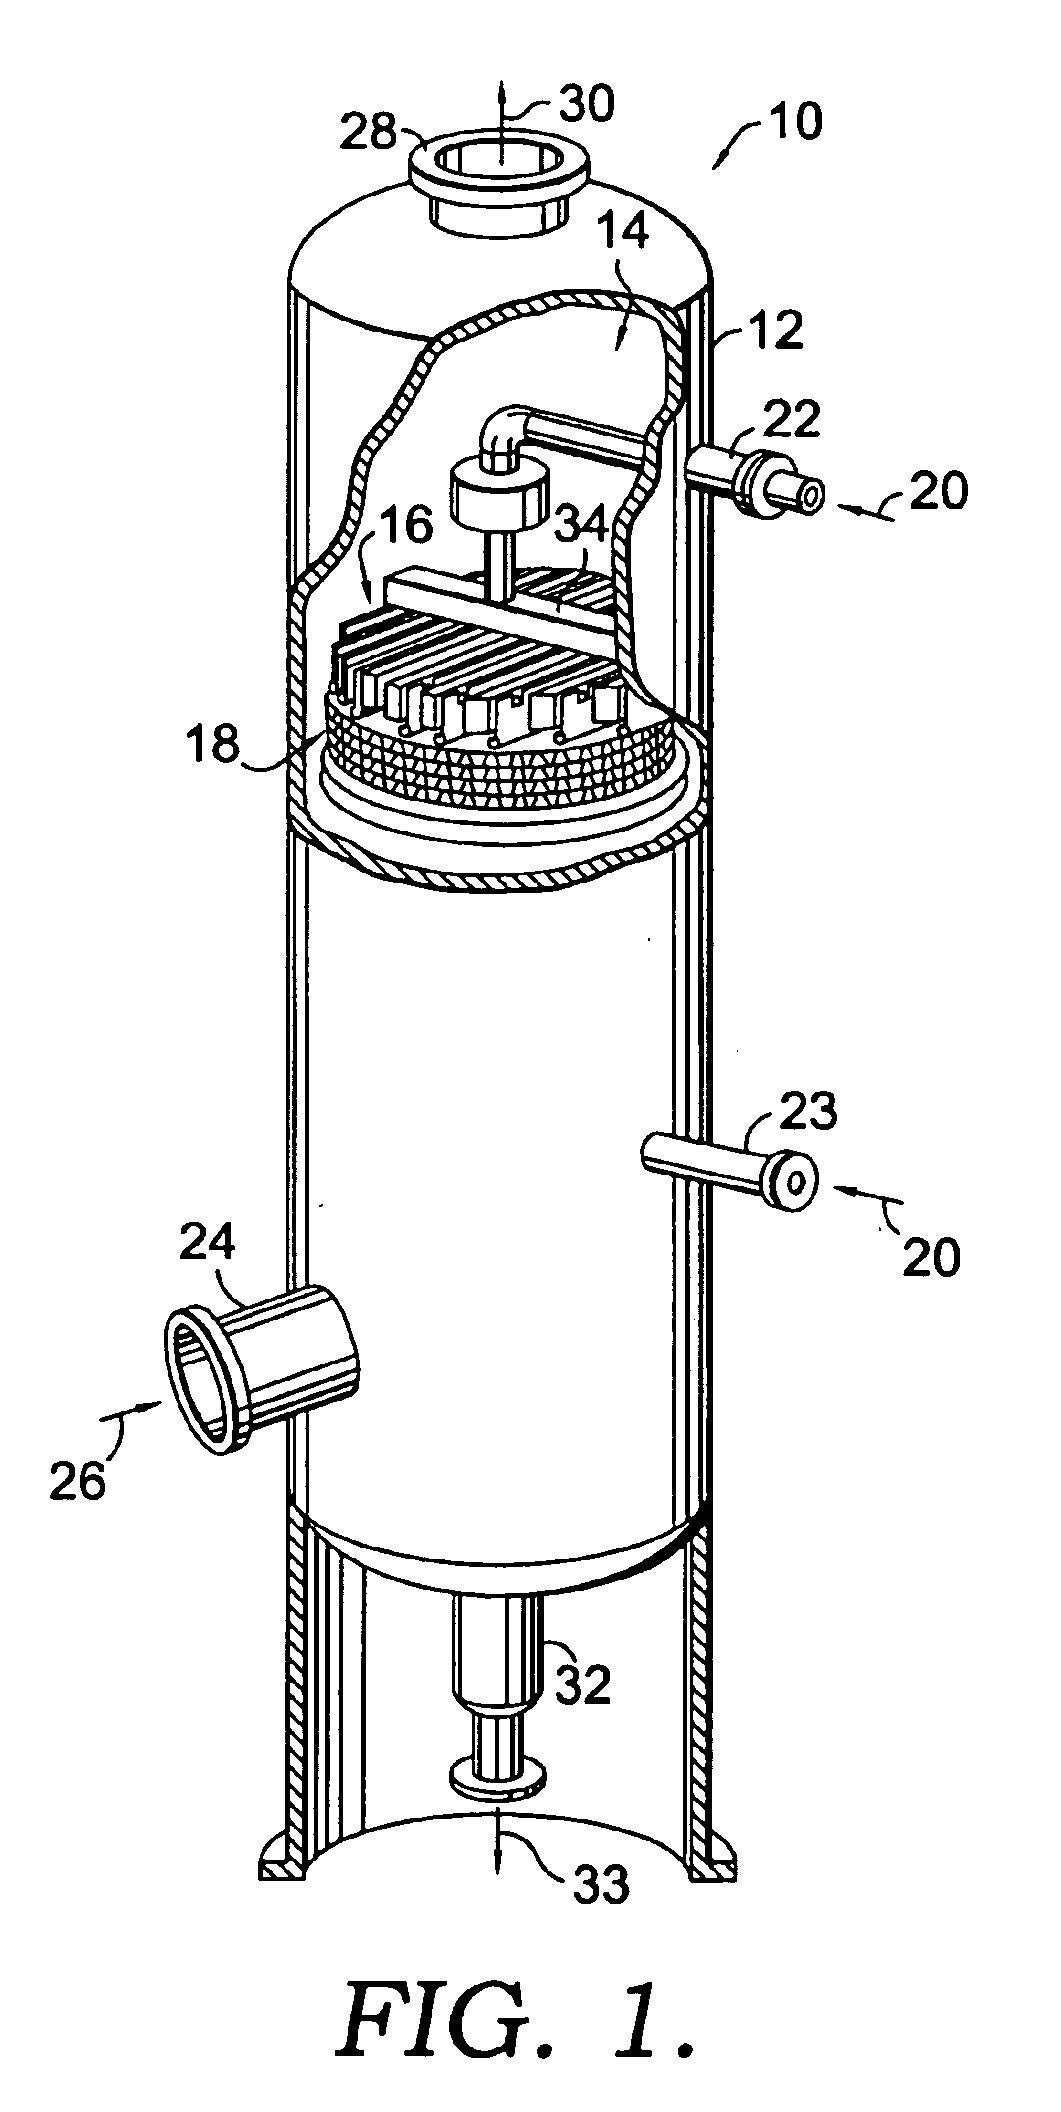 Liquid distributor for use in mass transfer column and method employing same